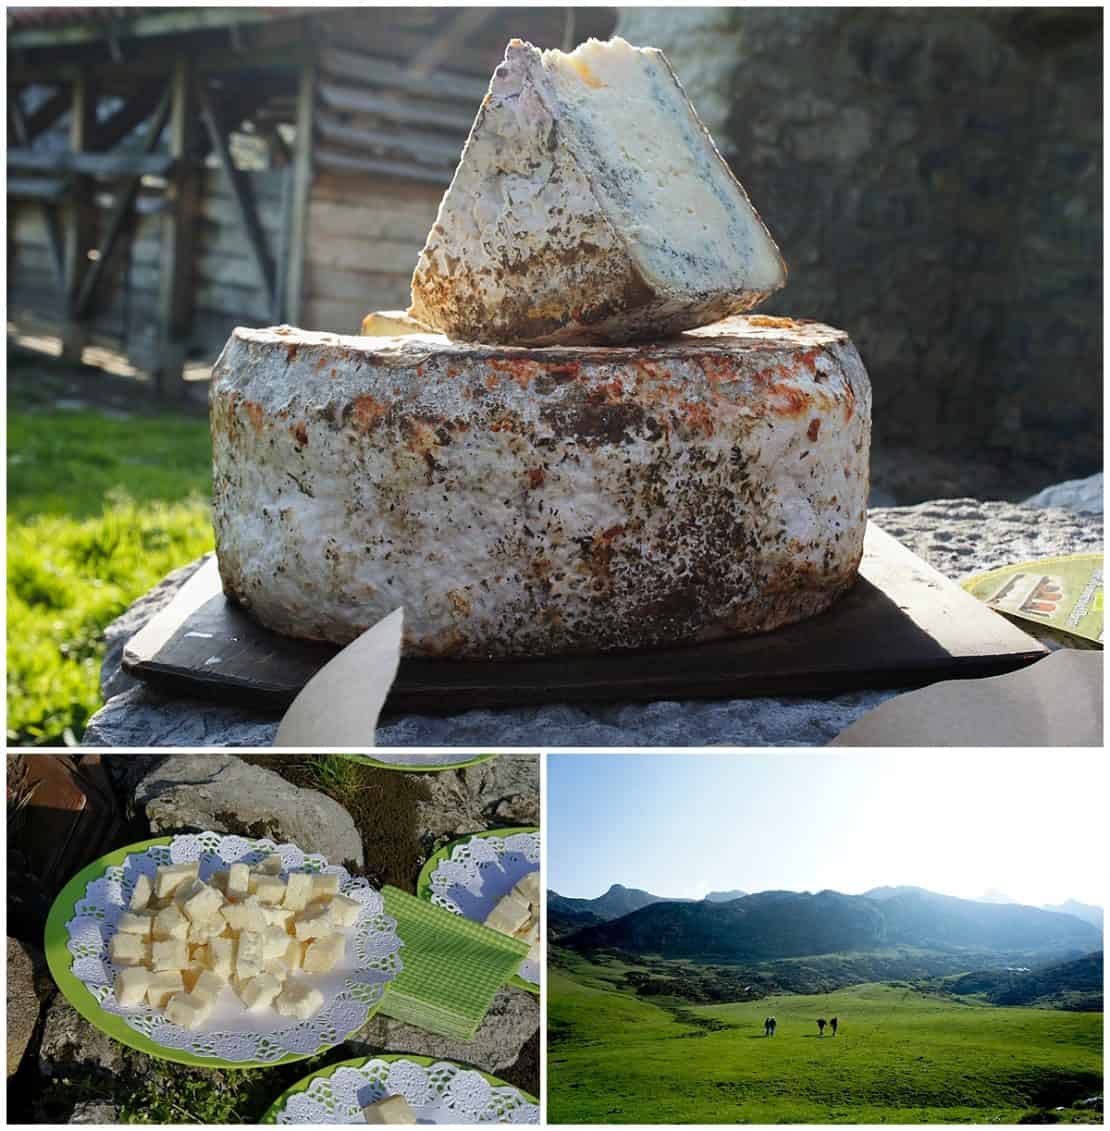 Picos Europa Authentic Farmed Cheese